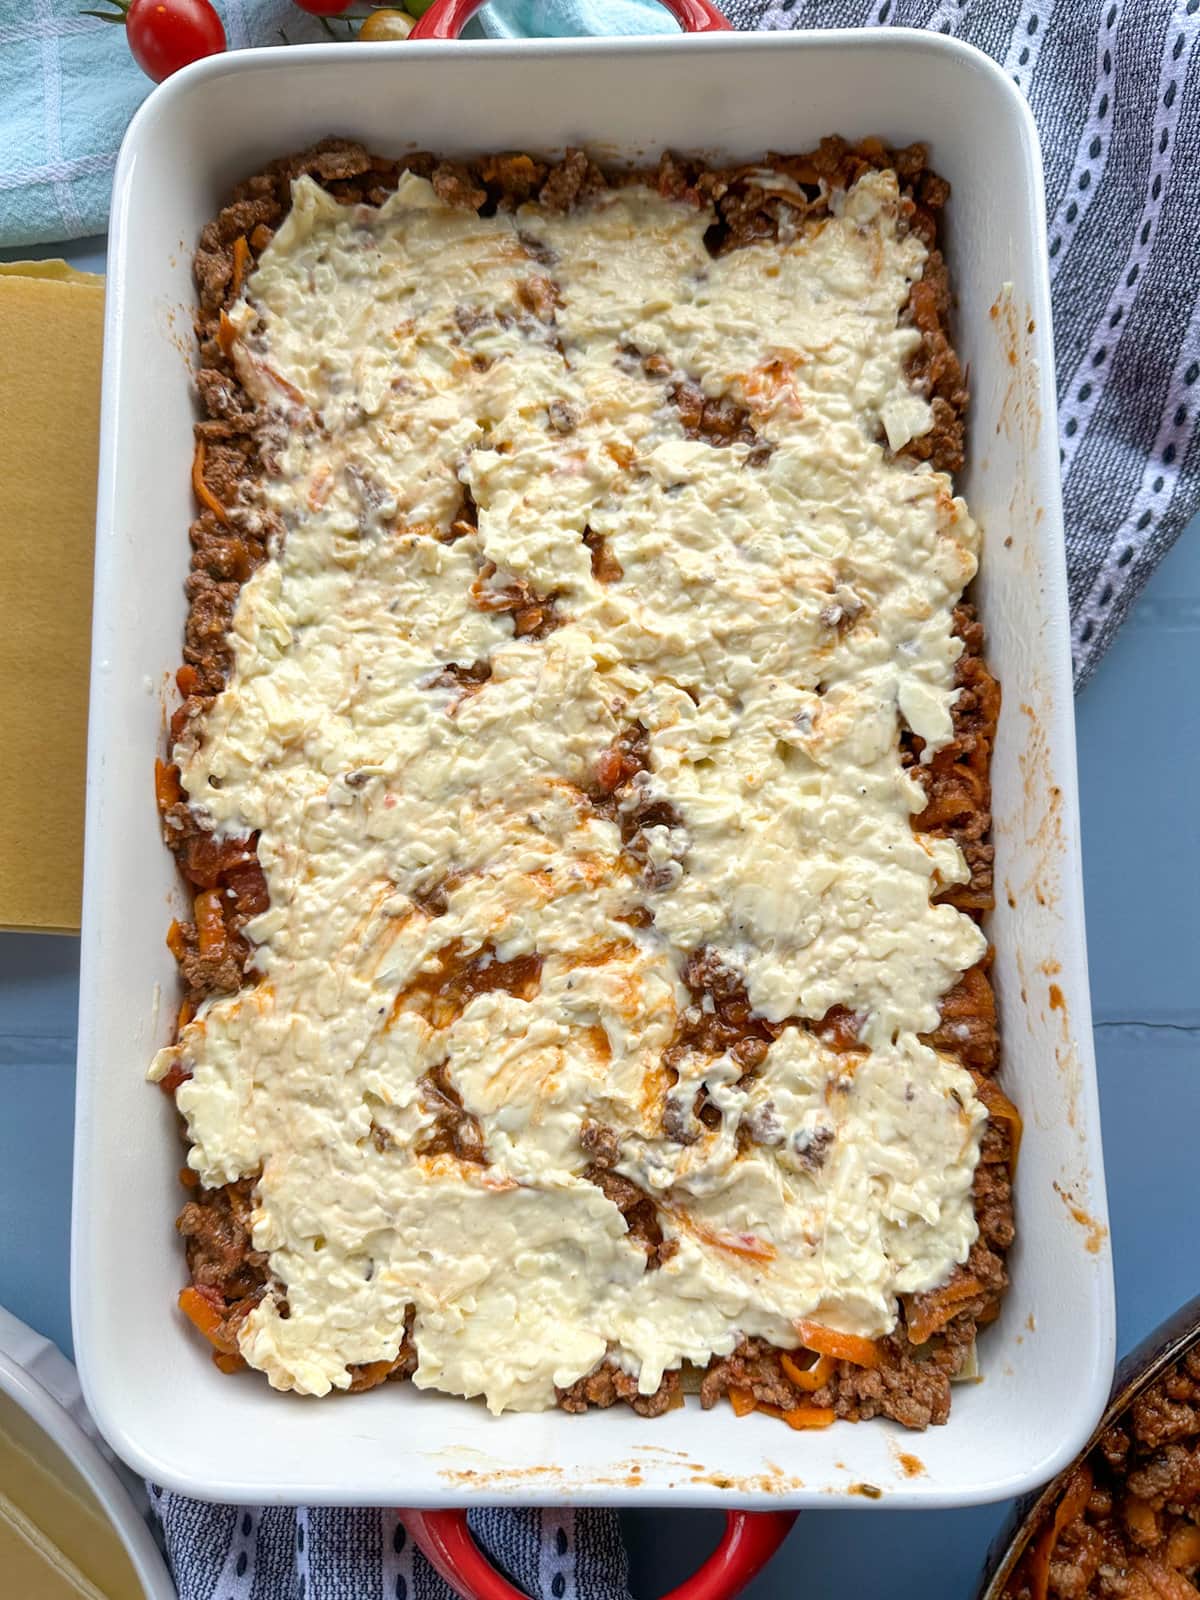 cheats lasagne with a cream cheese based recipe instead of béchamel